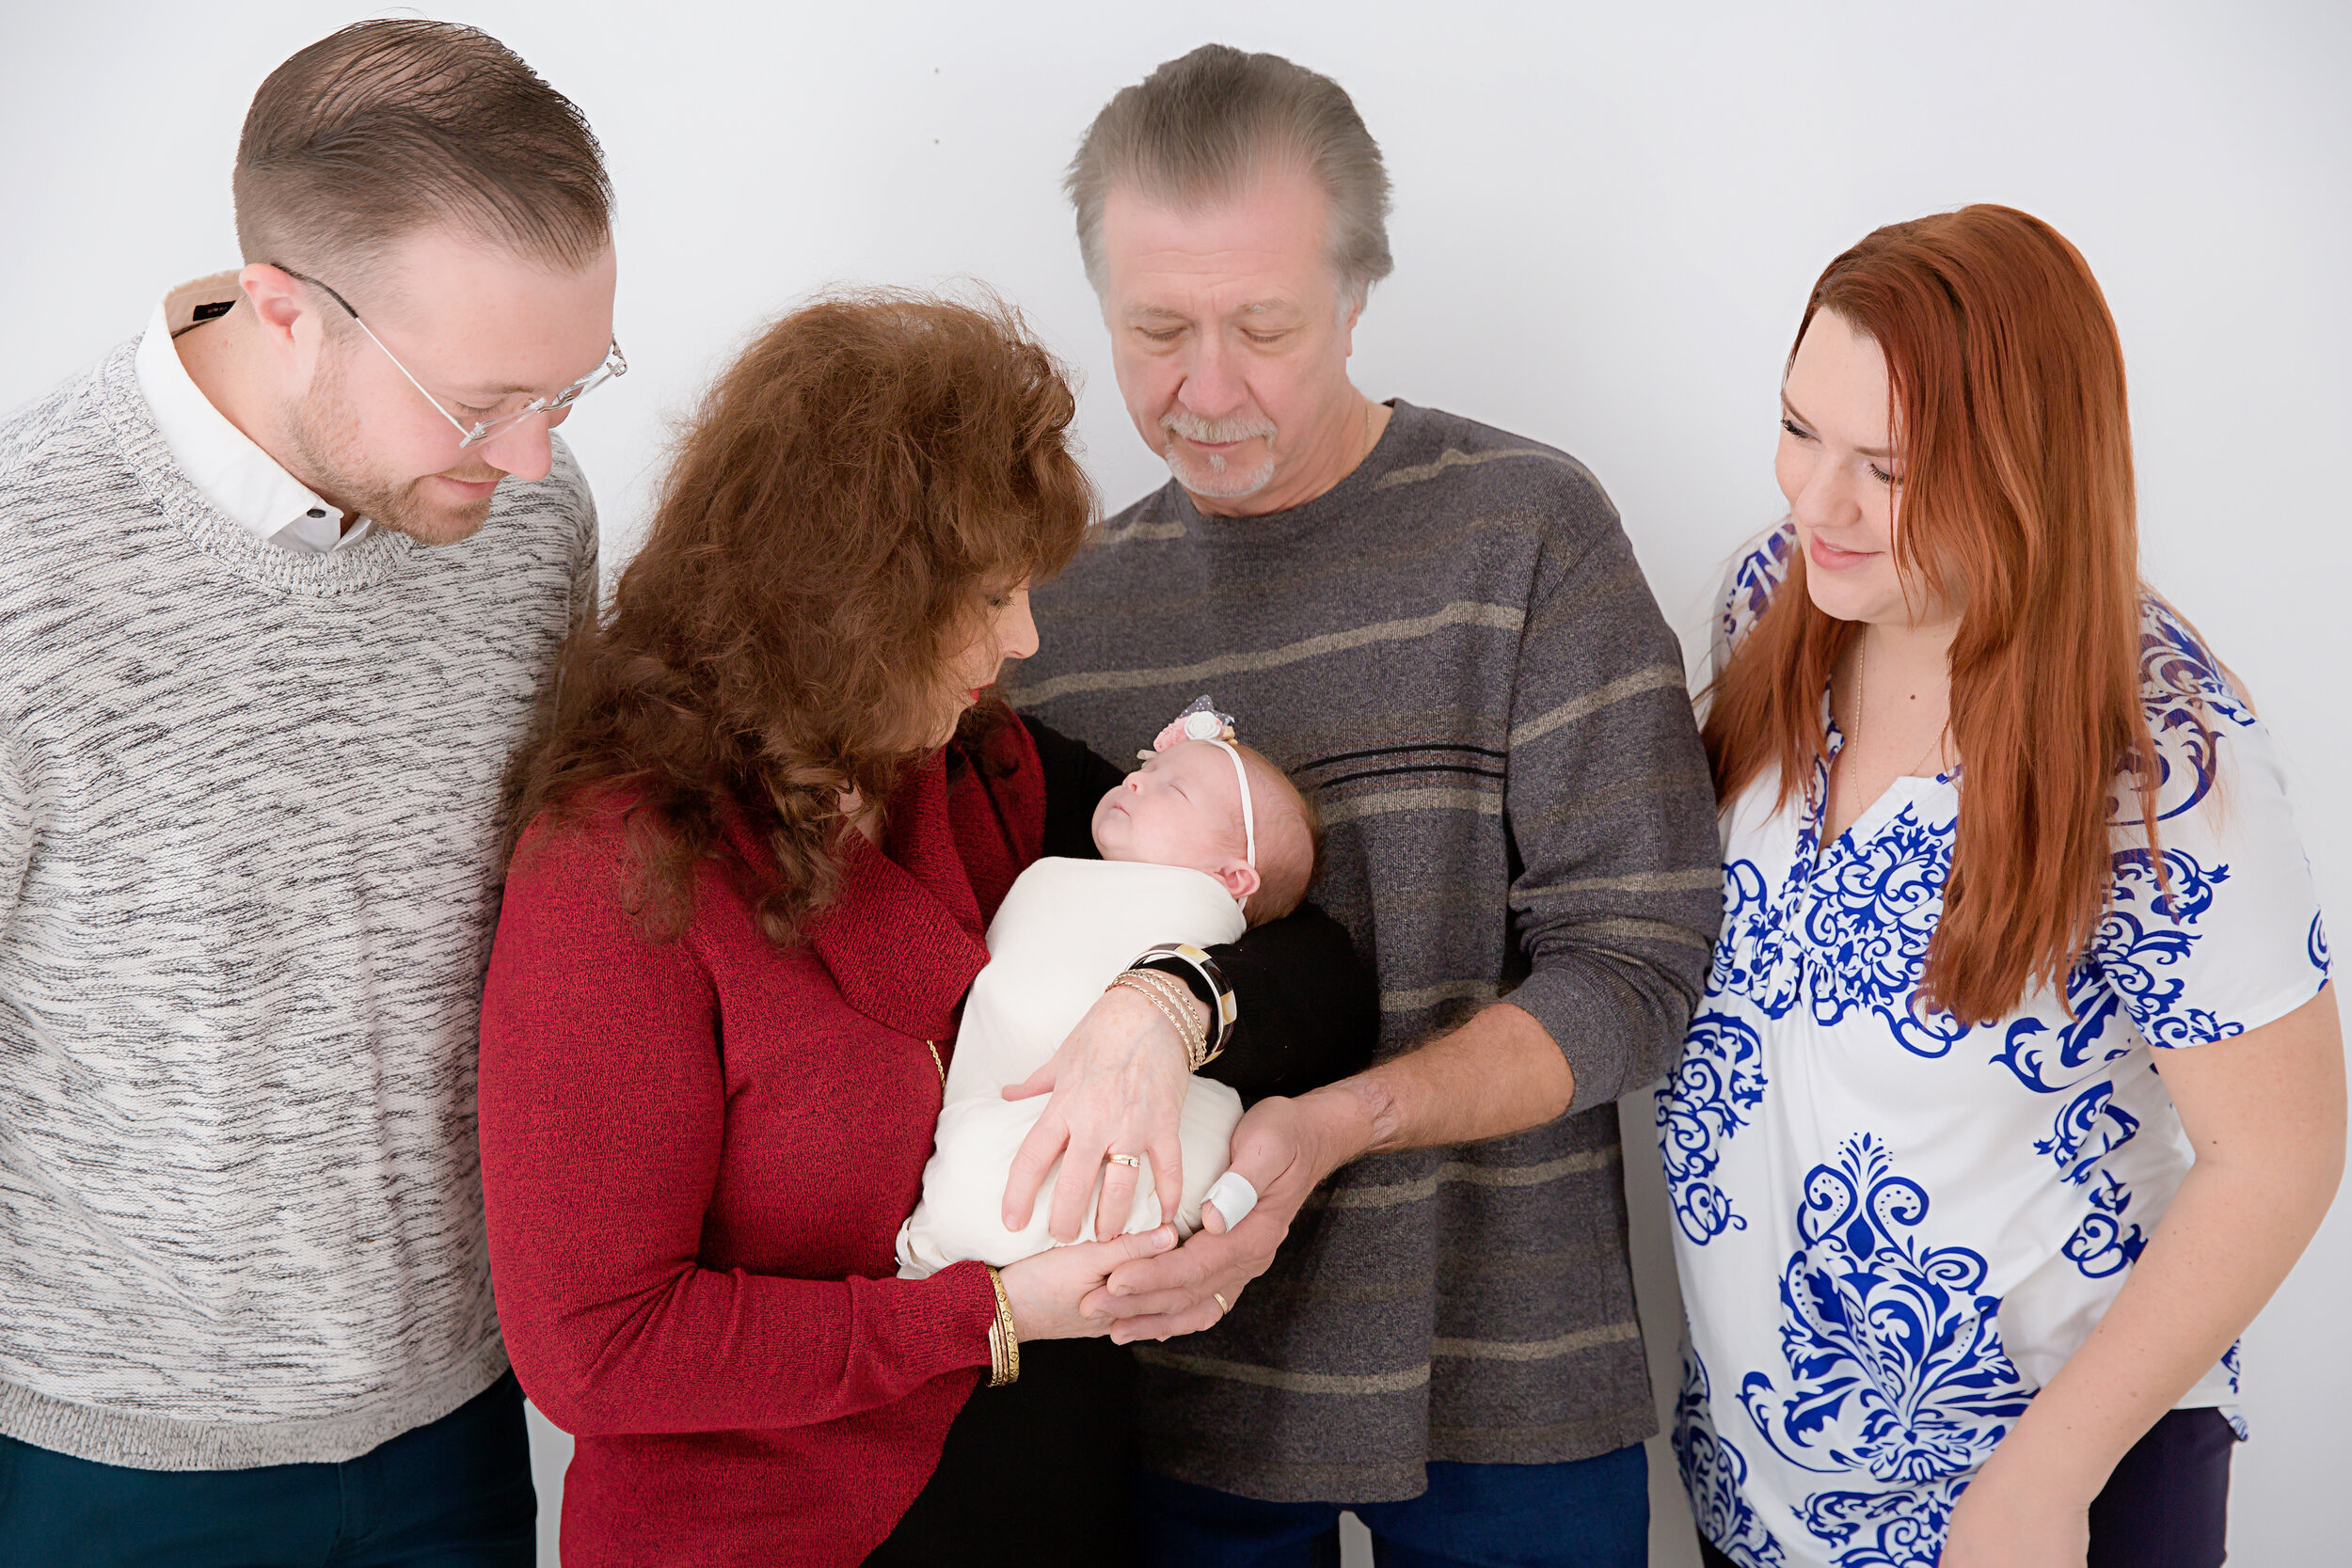 newborn-baby-girl-being-held-by-grandmother-and-other-family-members